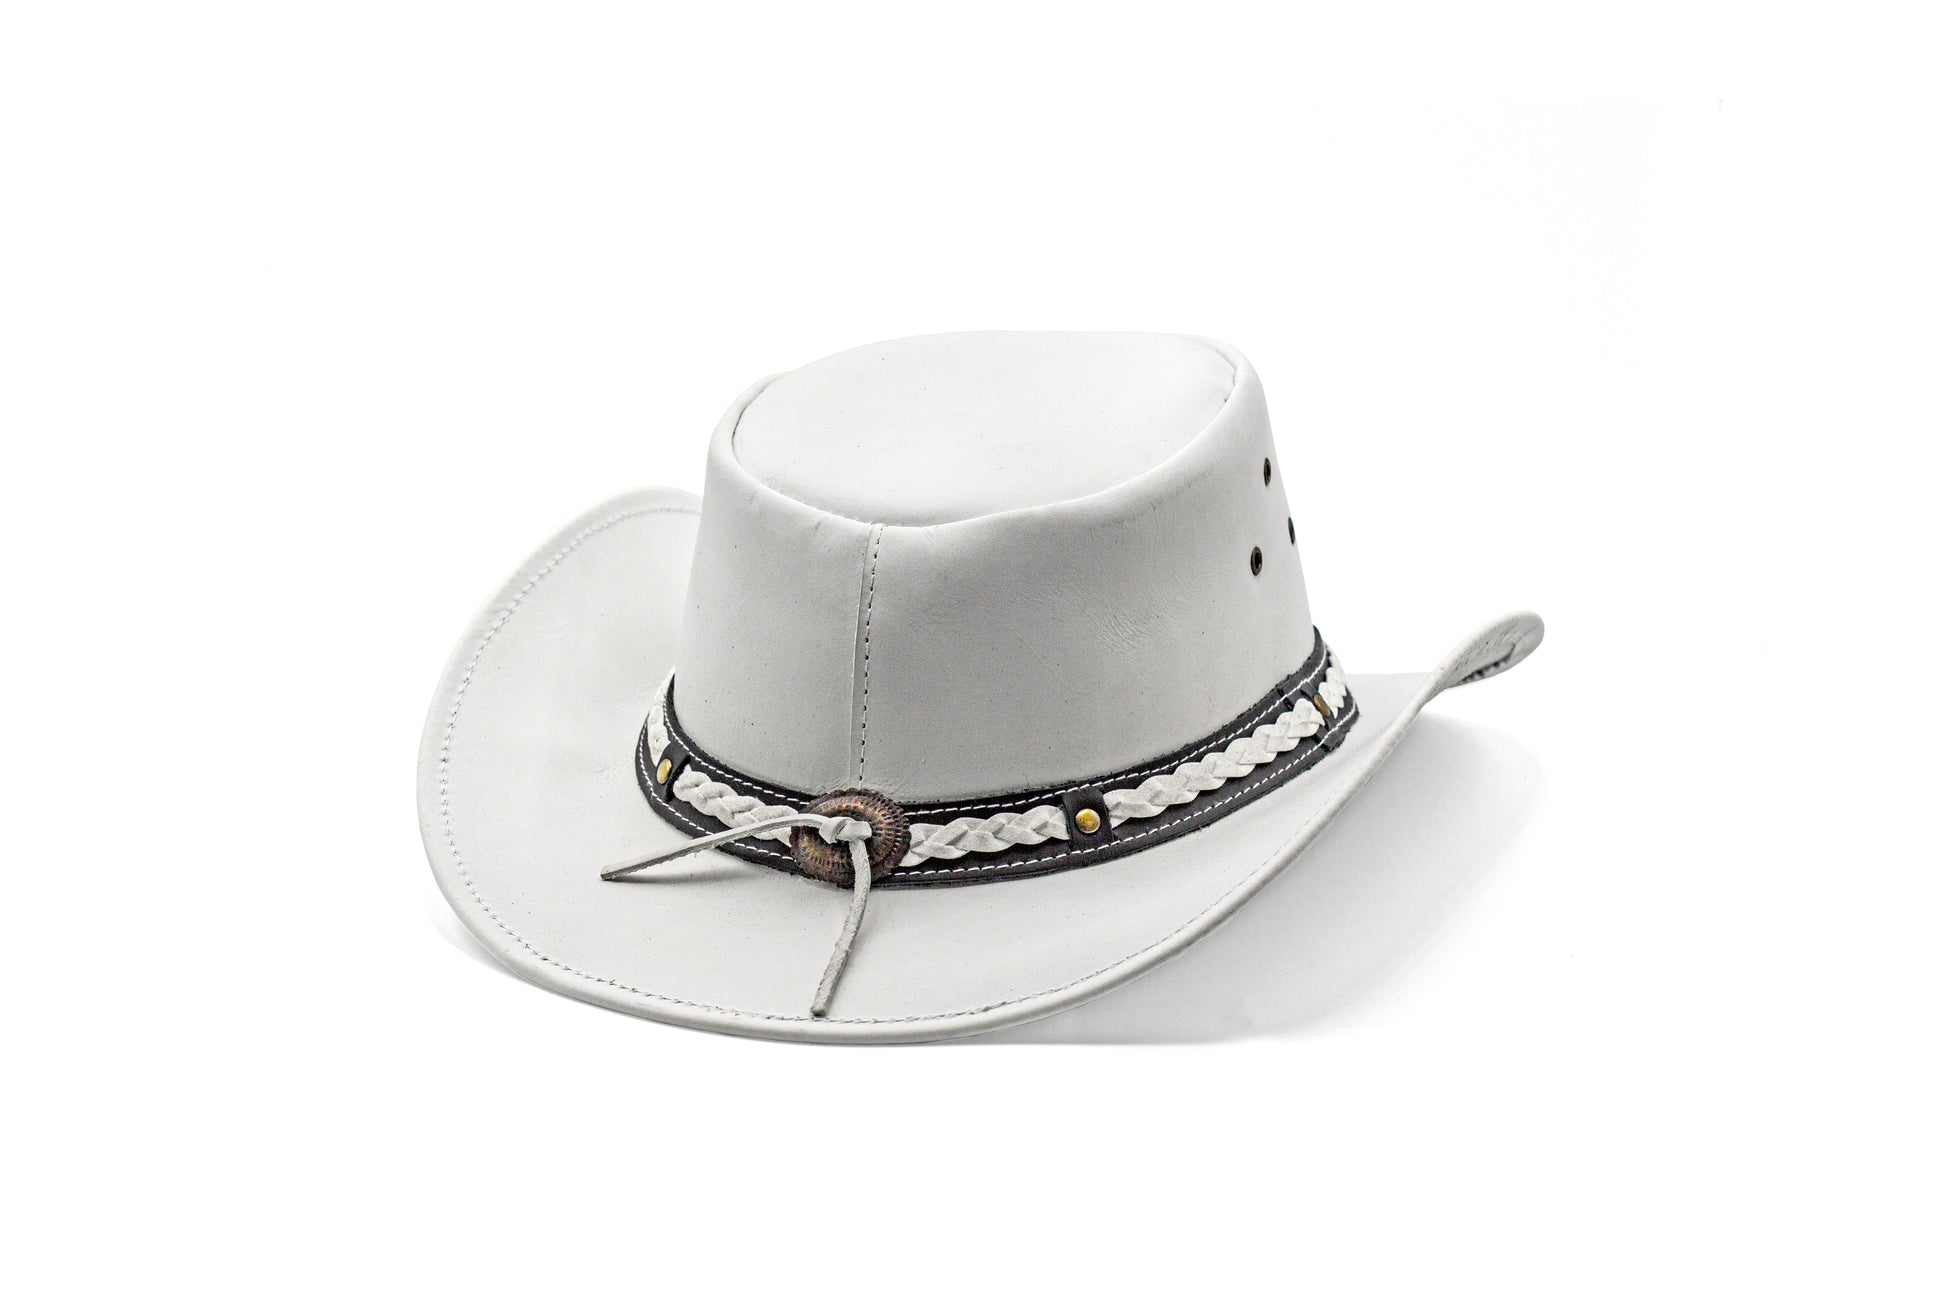 white leather cowboy hat Australian style shapeable as outback best gift on Father’s Day Mother’s Day bachelor party easter  